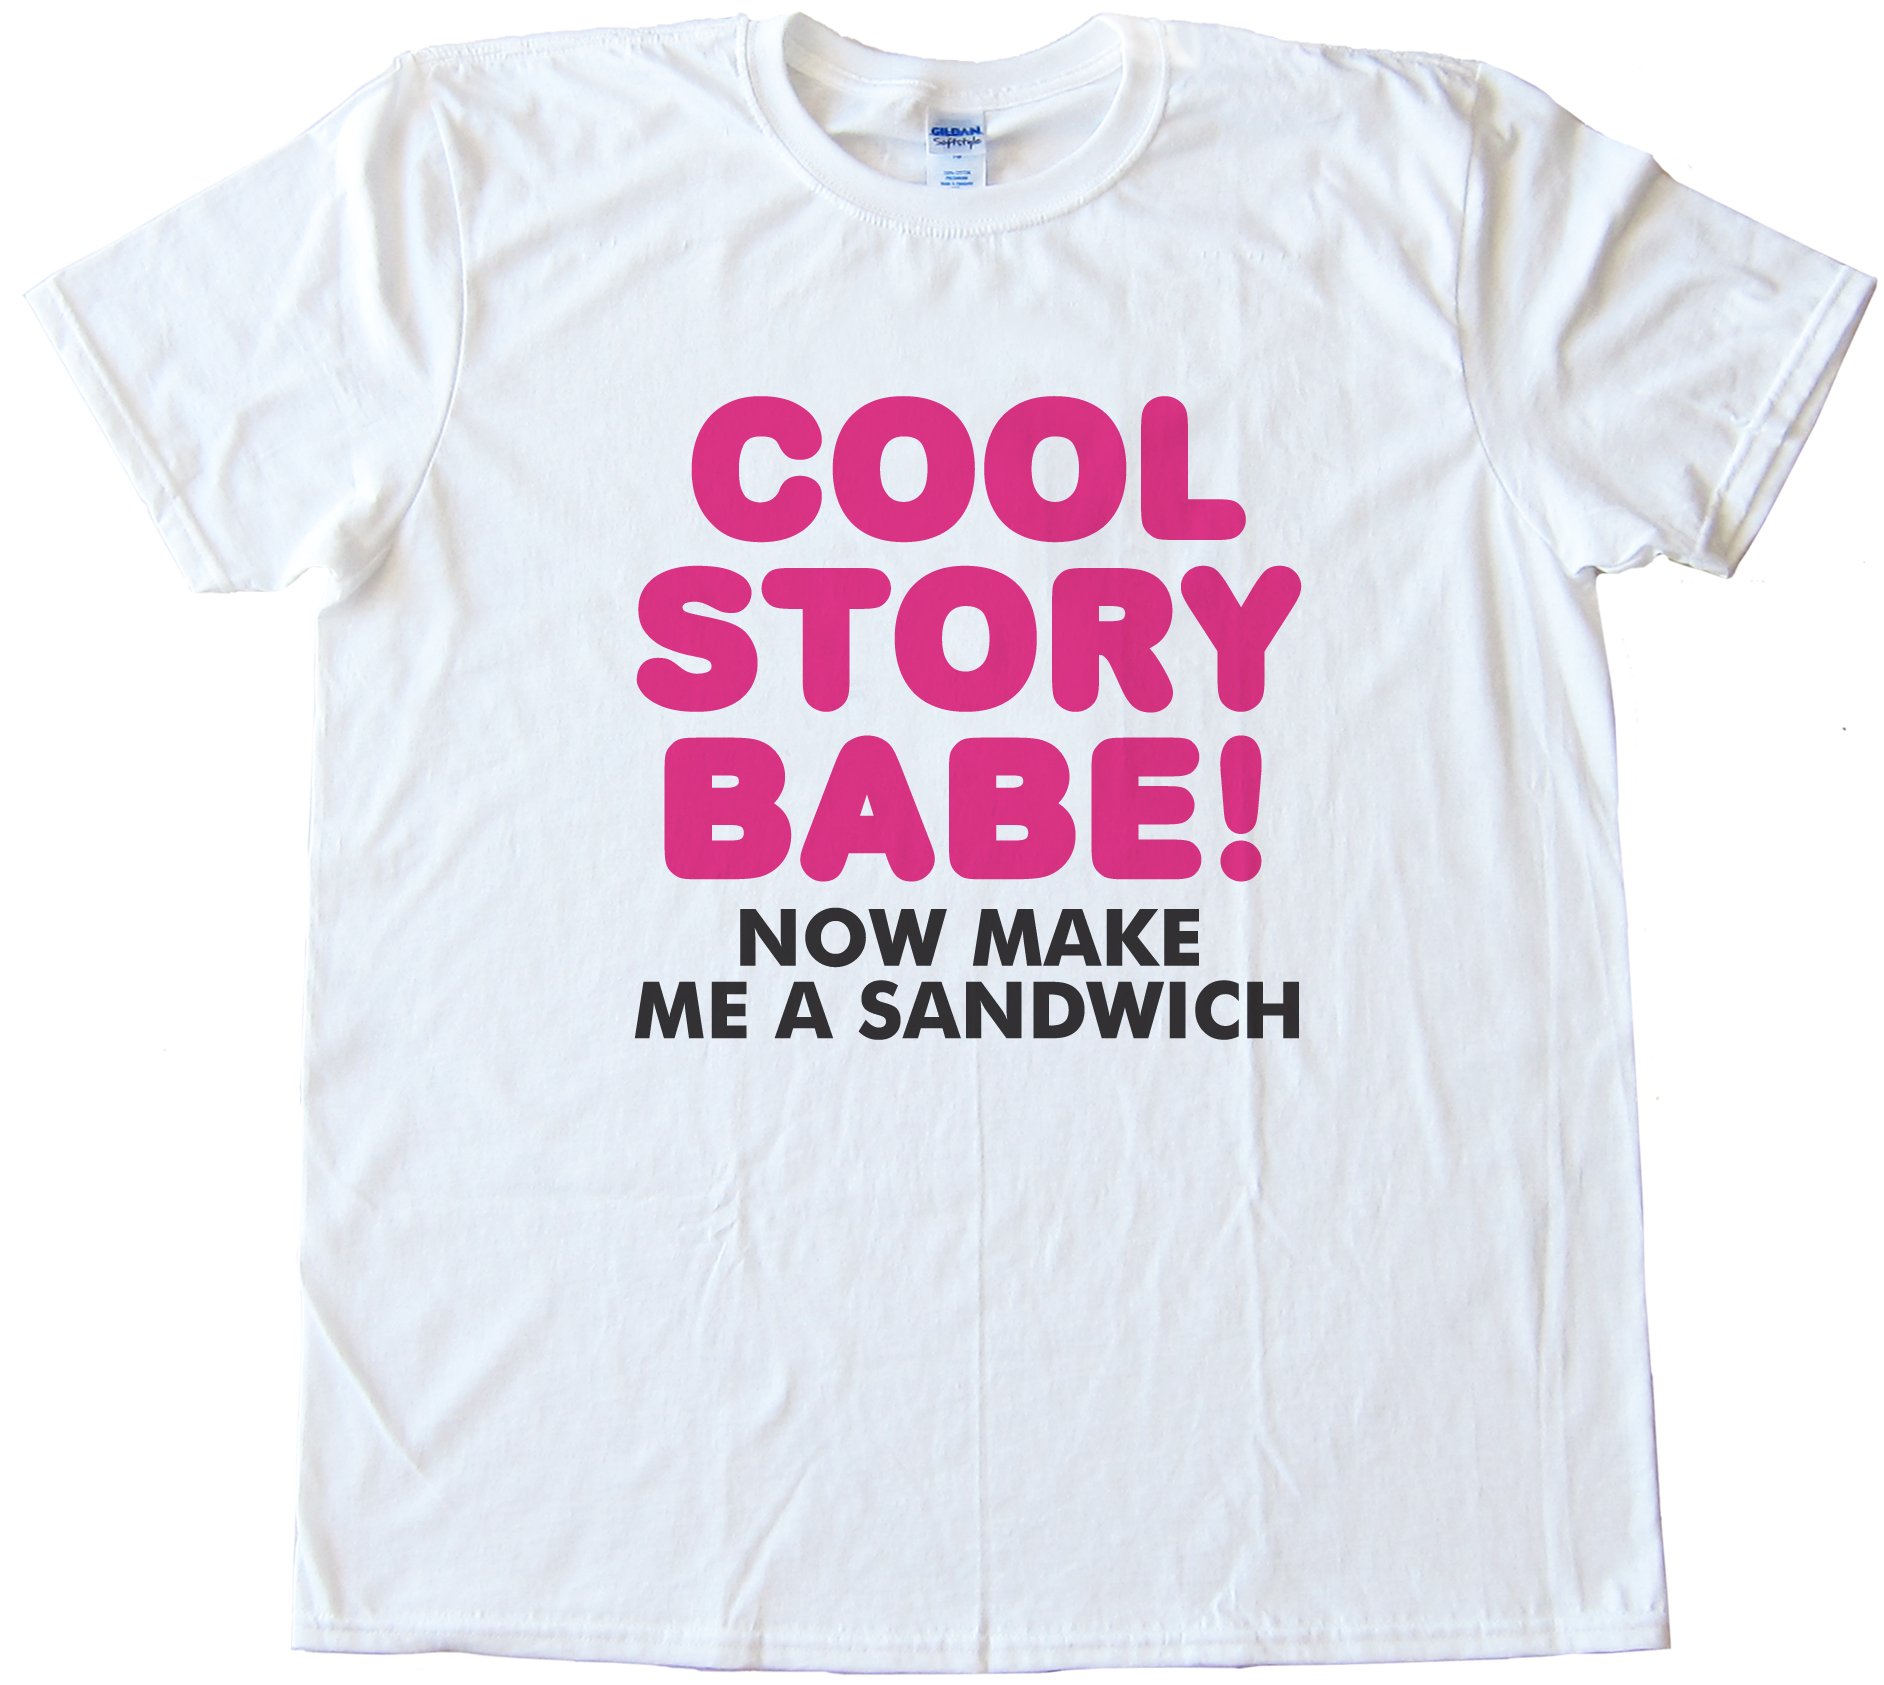 Cool Story Babe! Now Make Me A Sandwich Tee Shirt